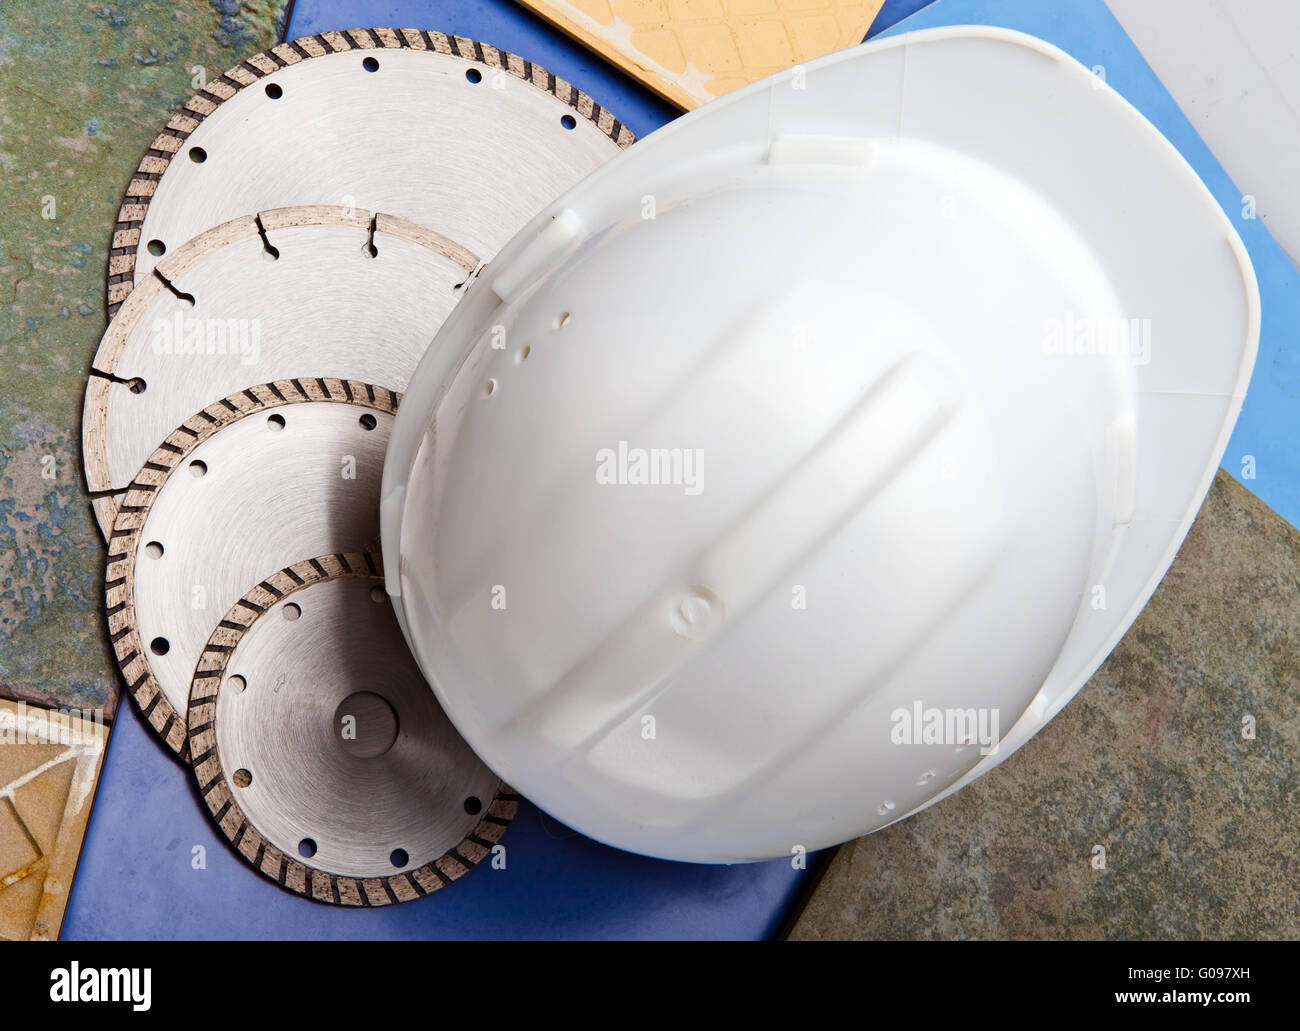 Diamond discs for cutting of tile and a helmet Stock Photo